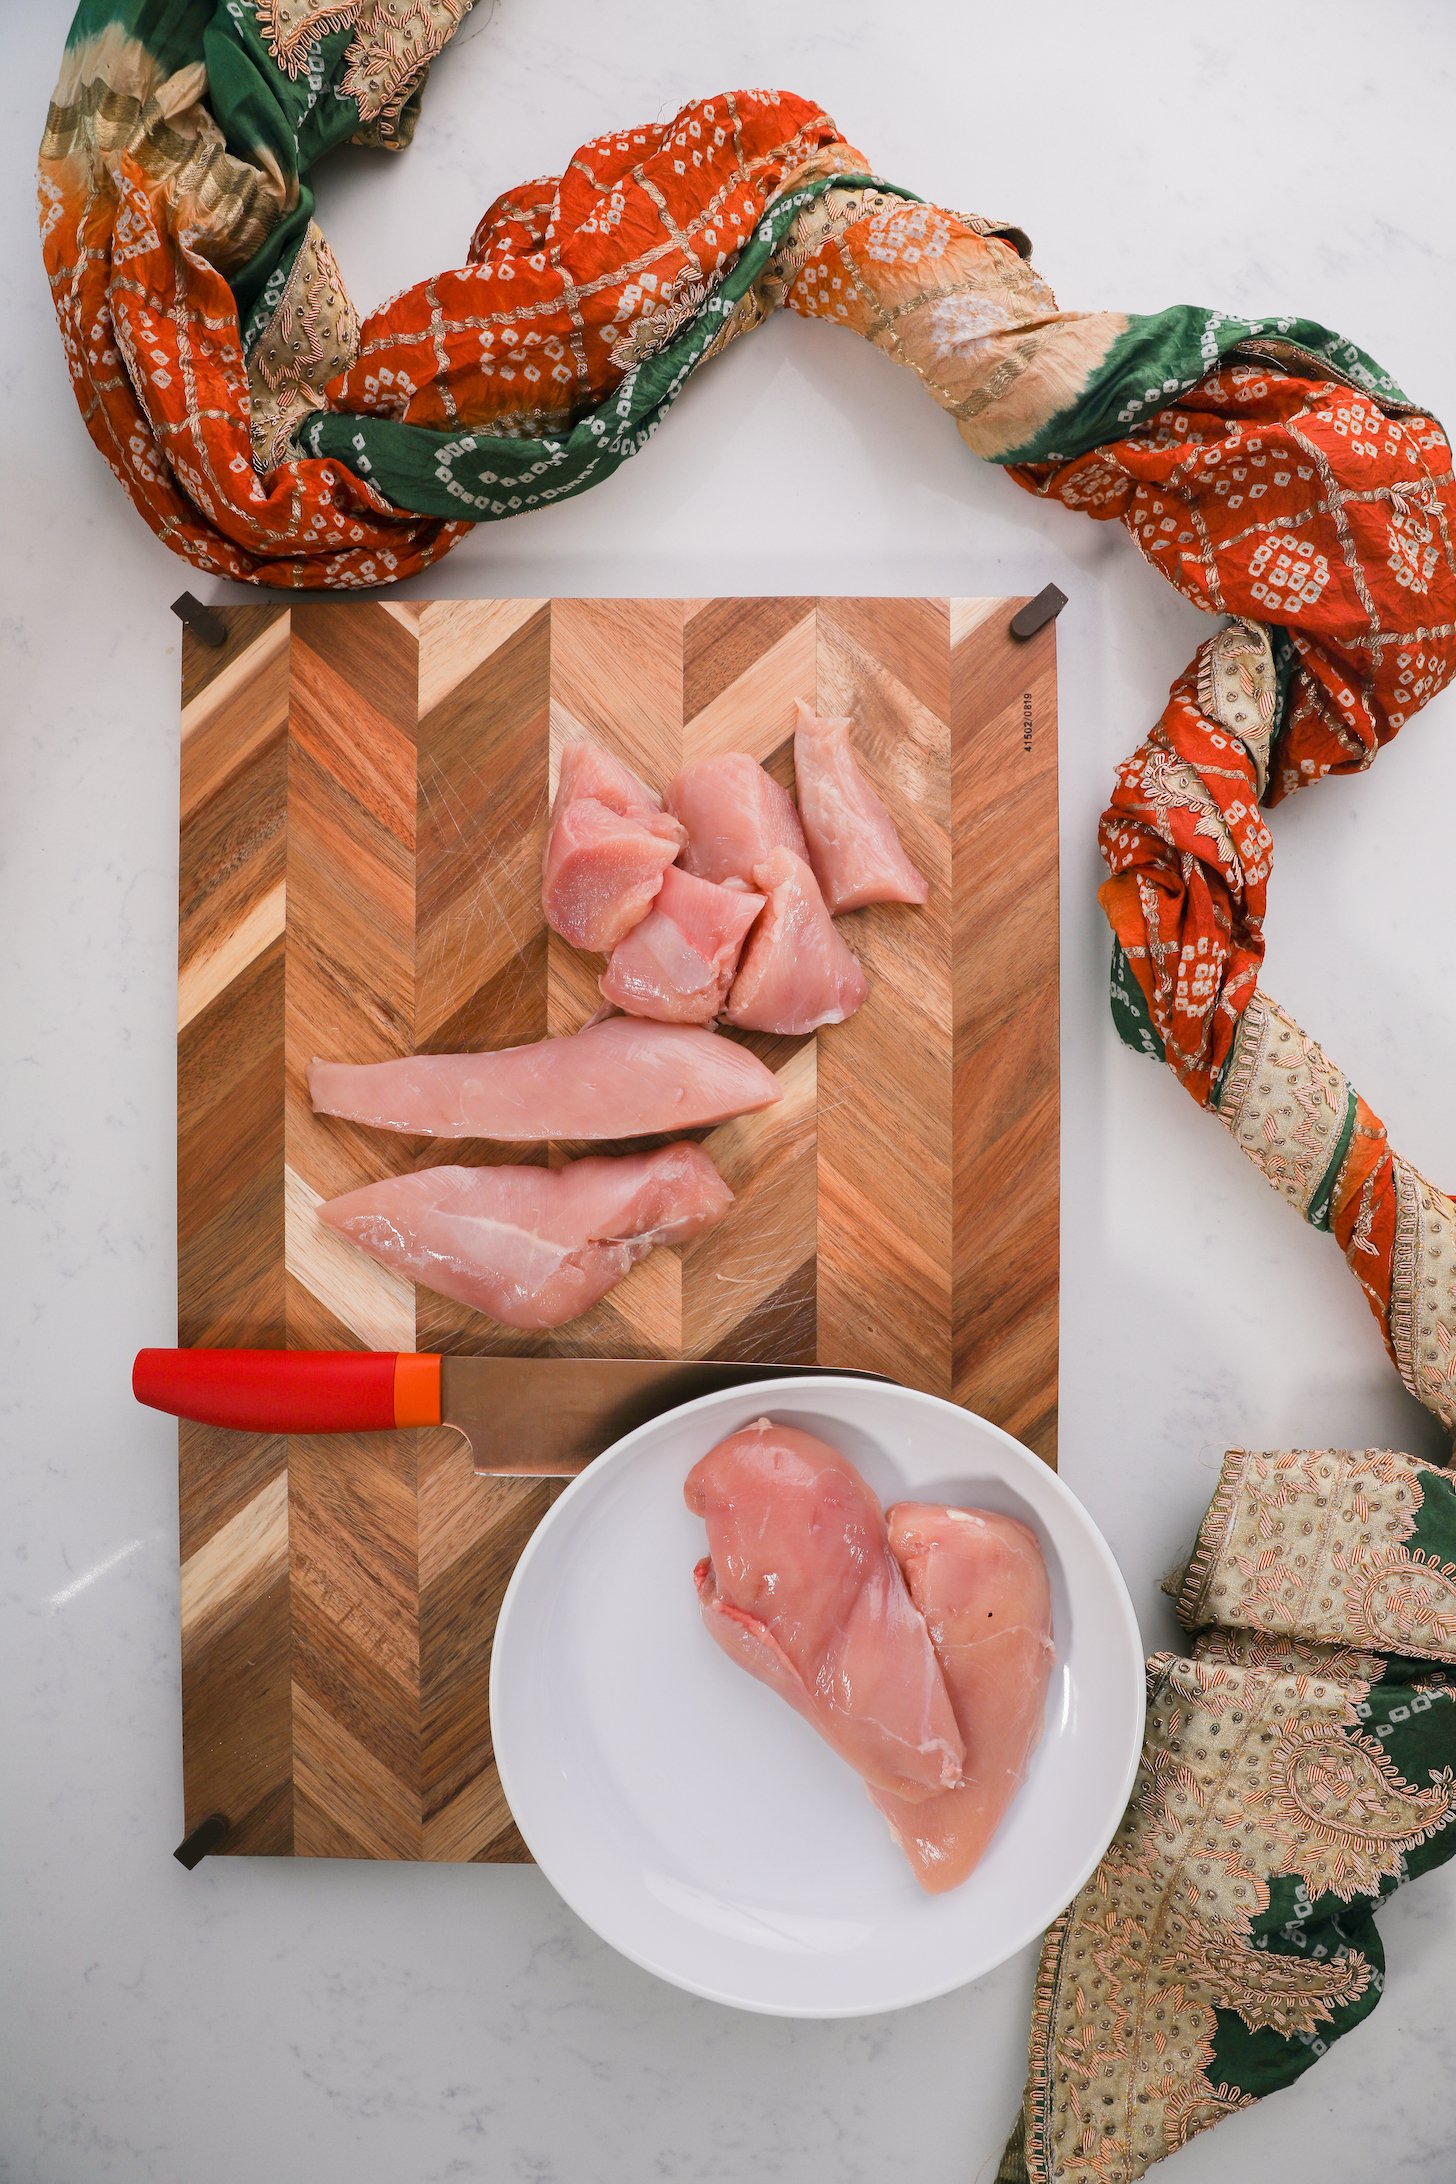 Chicken breast cut into various shapes on a wooden board.